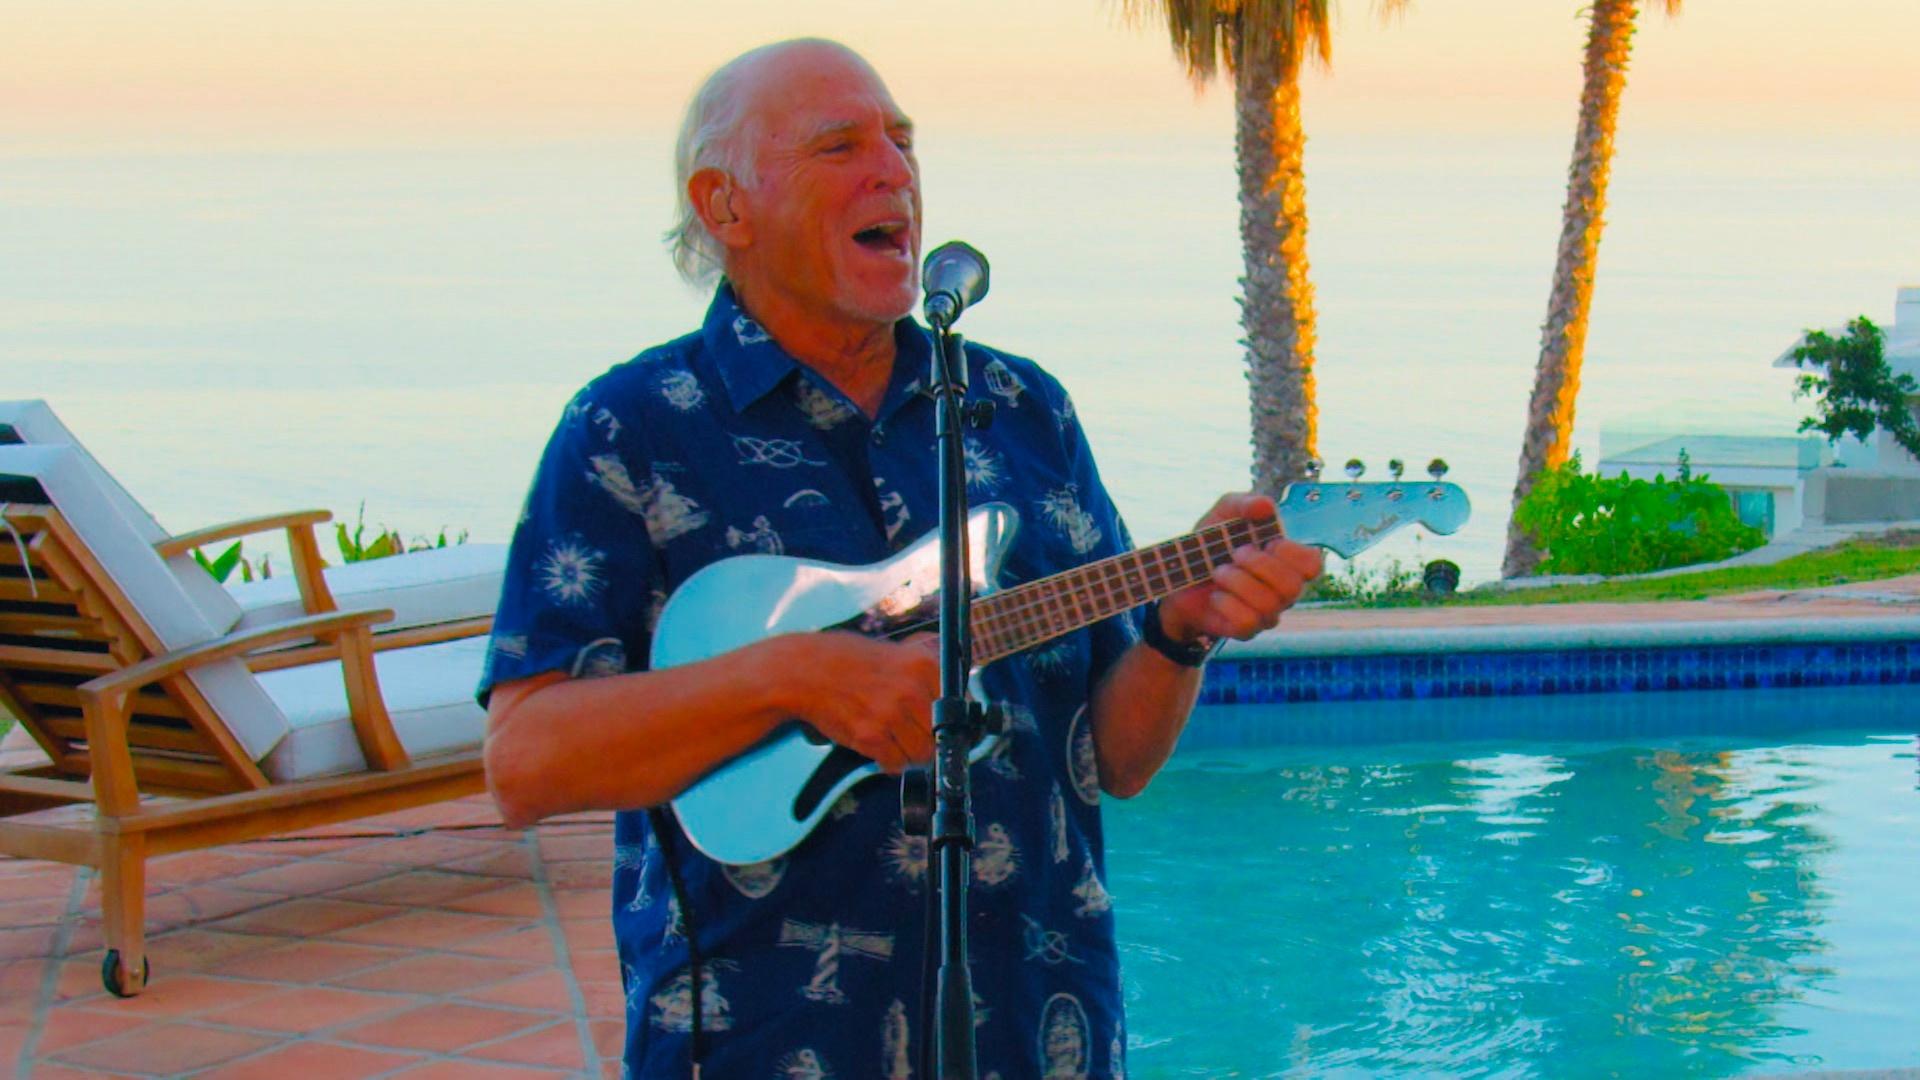 Jimmy Buffett Performs "This Land is Your Land"